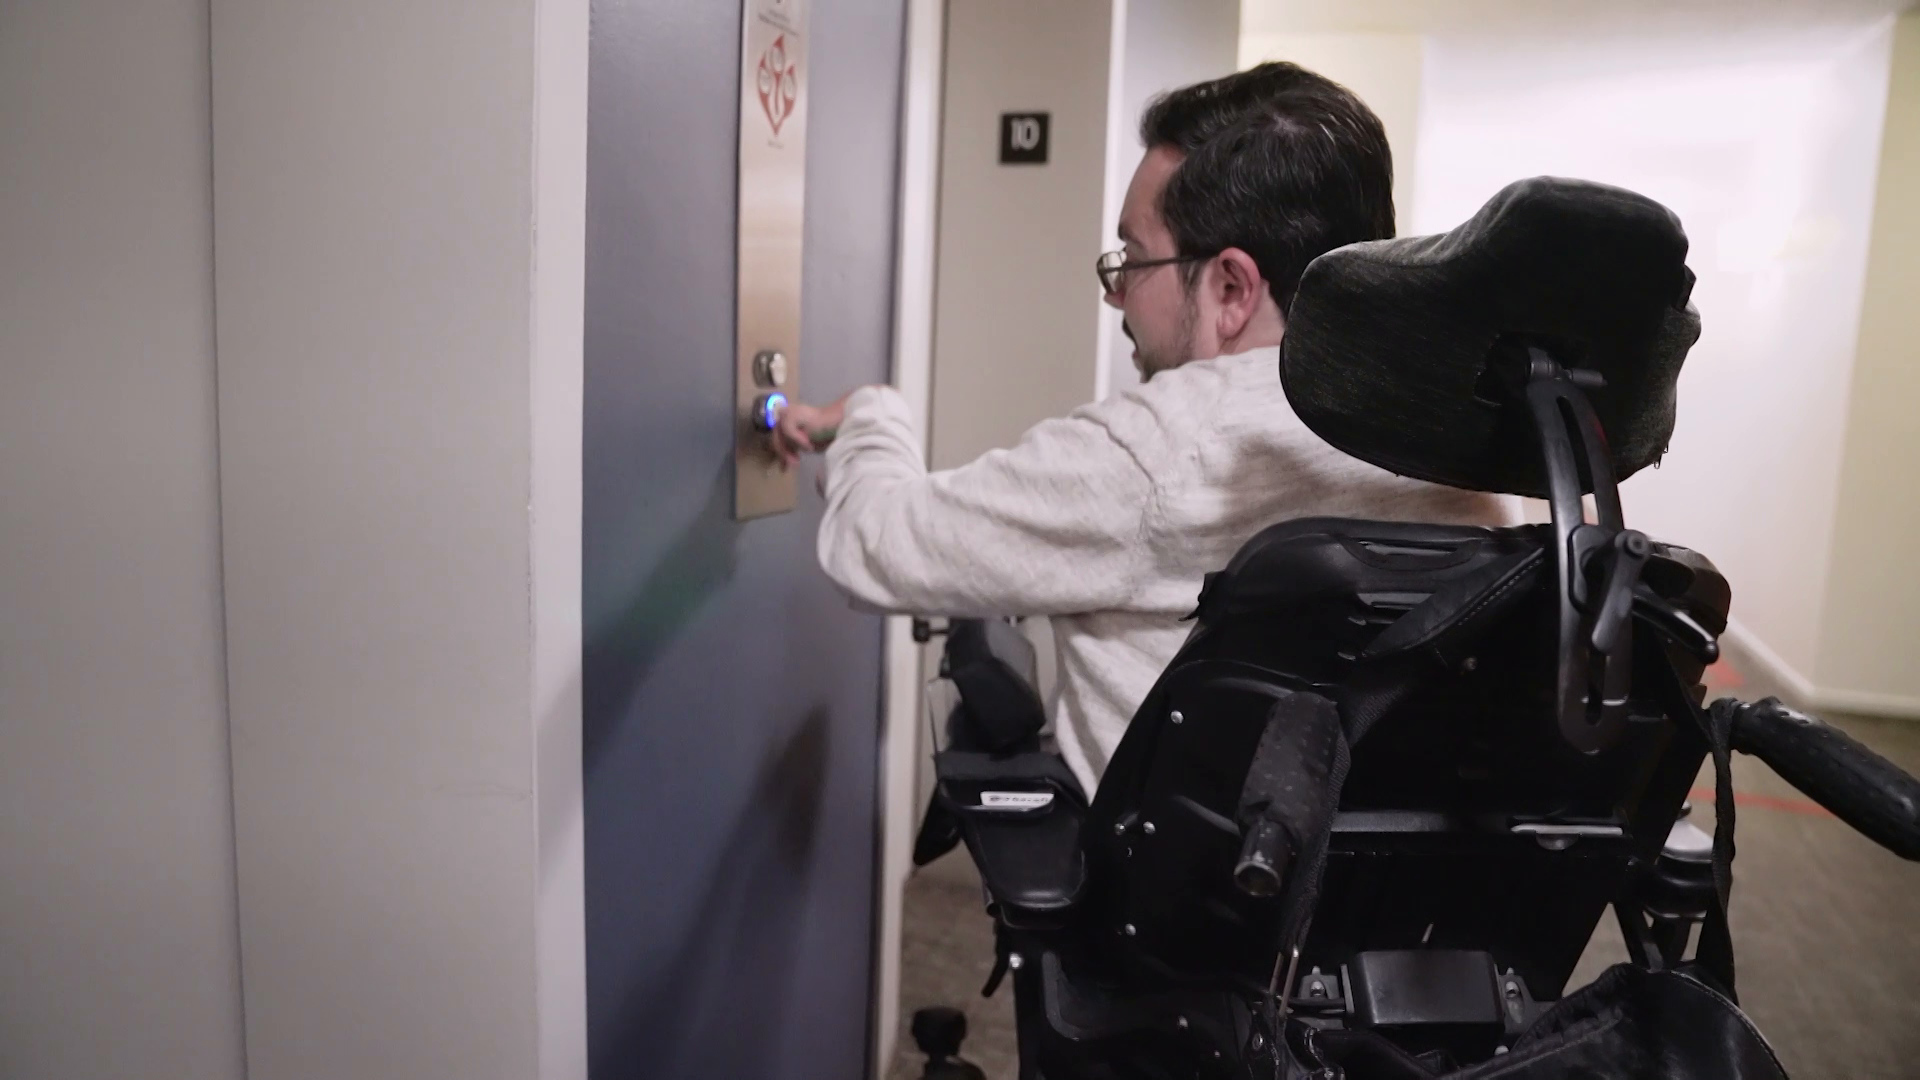 William Crowley pushes an elevator button while in his wheelchair.